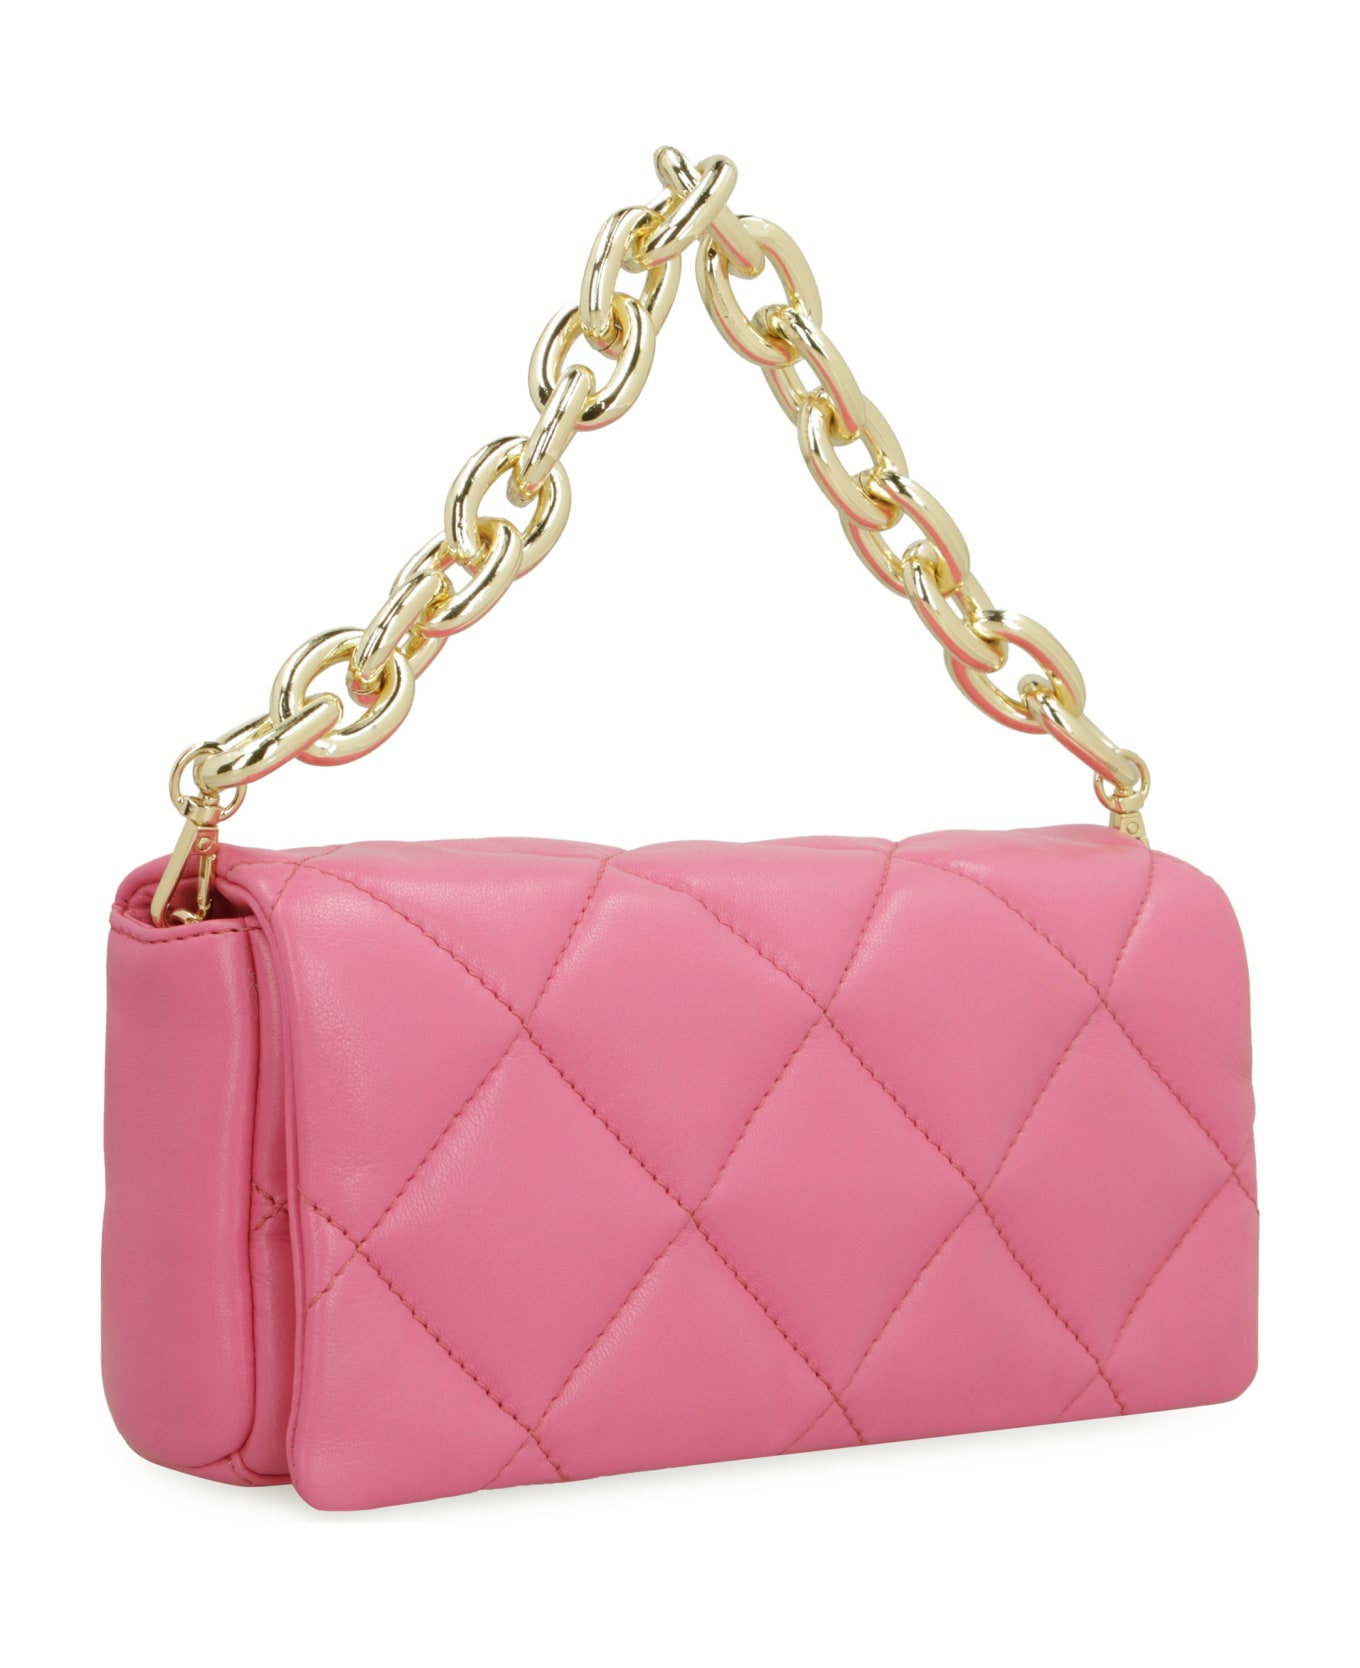 STAND STUDIO Hera Quilted Leather Bag - Fuchsia クラッチバッグ